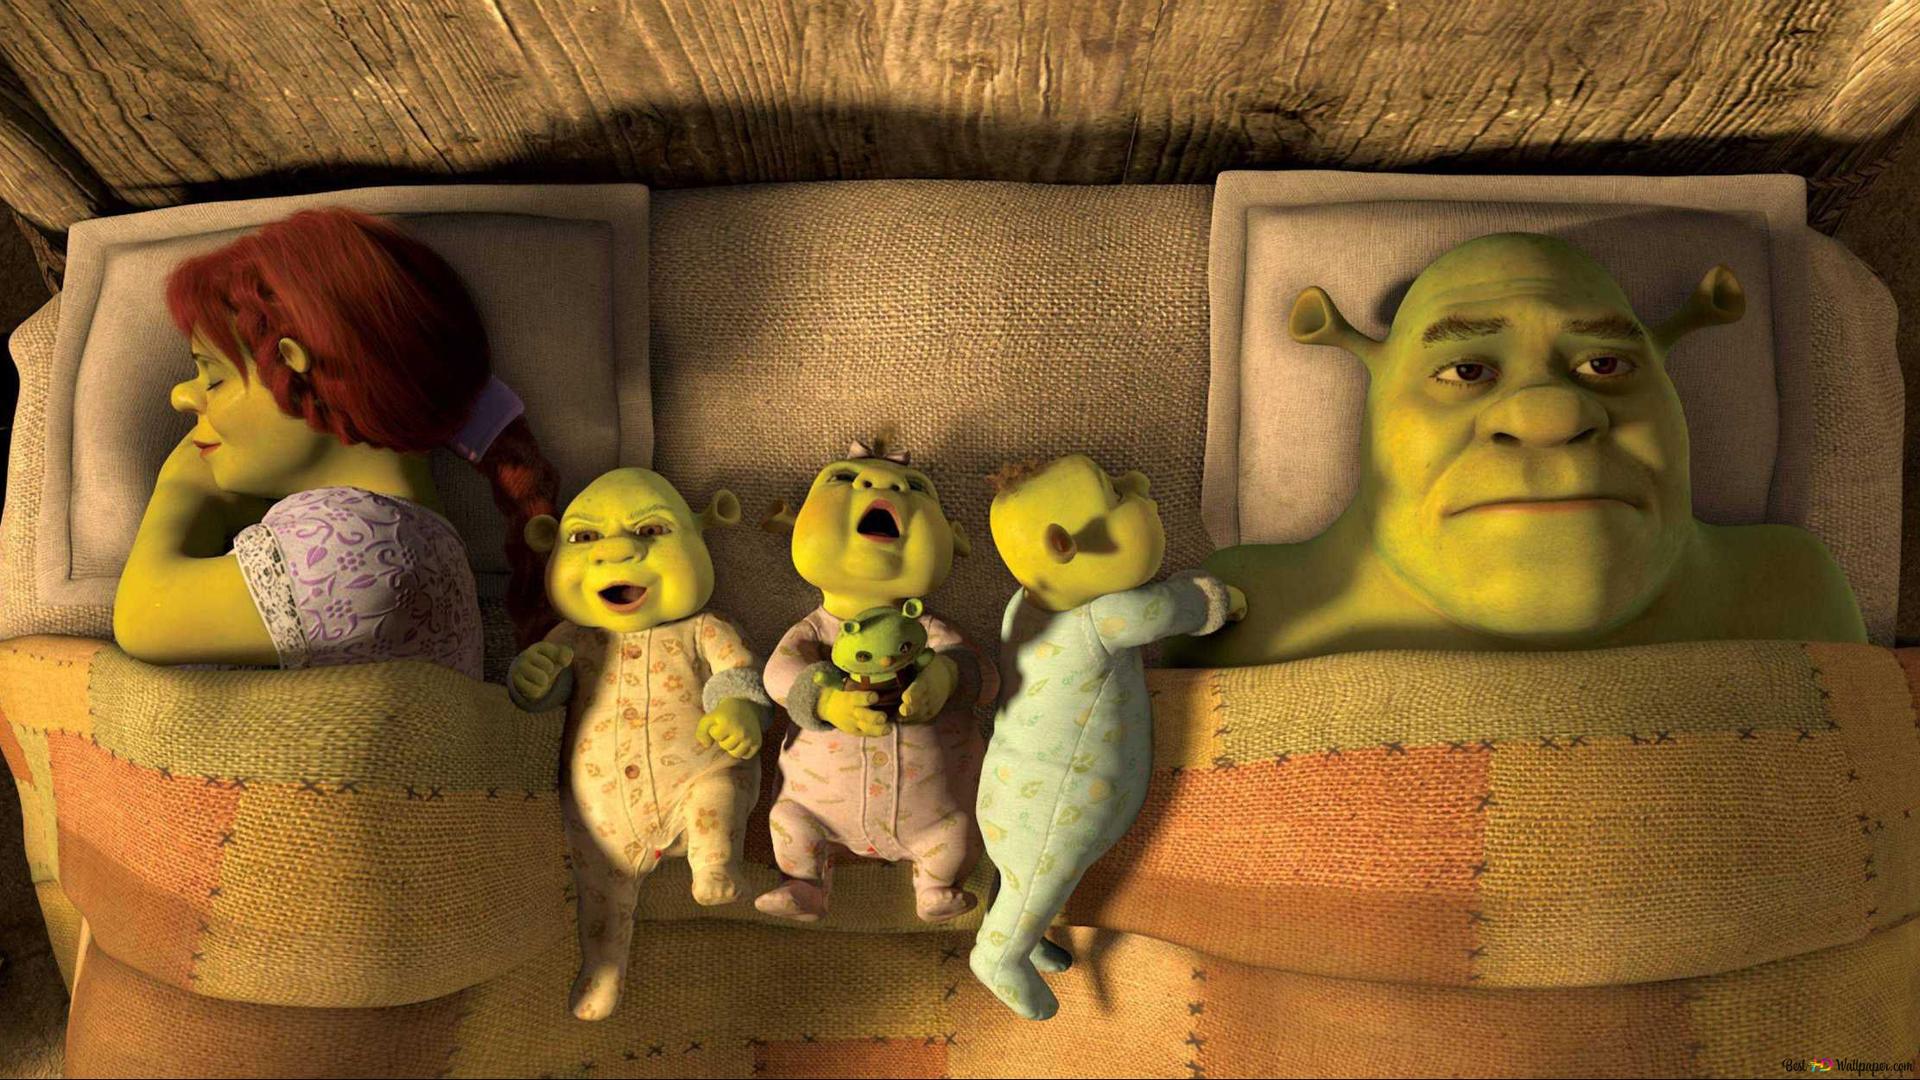 Shrek and princess fiona from the animated movie Shirek sleep with their children 2K wallpaper download